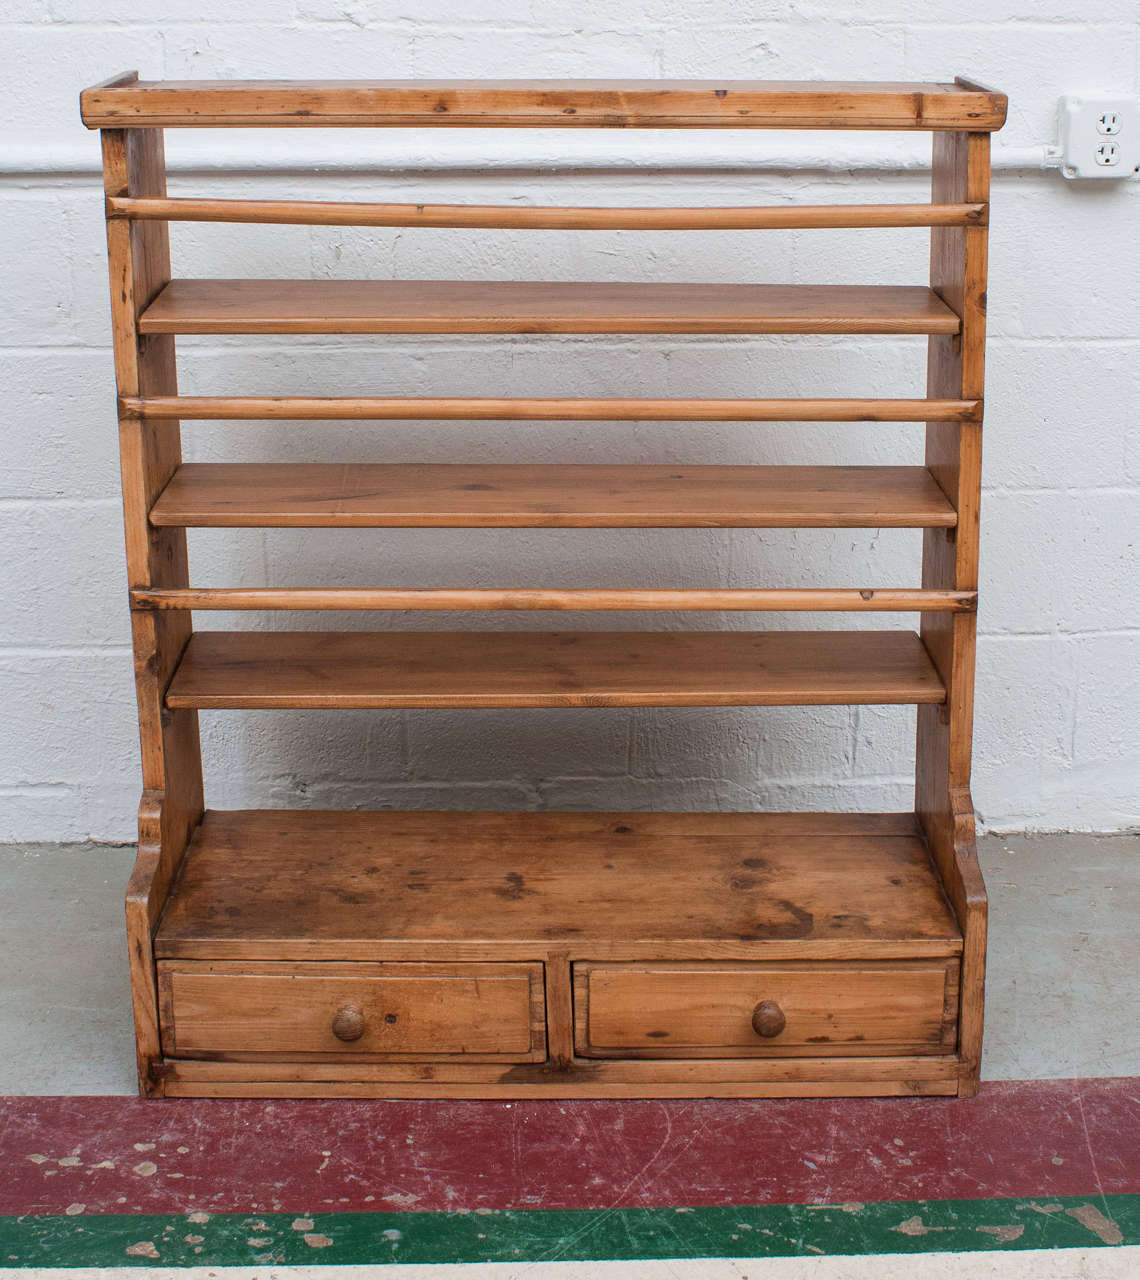 A charming two-drawer hanging plate rack featuring all morticed and dovetailed construction with four shelves for storing or displaying small plates or other objects.